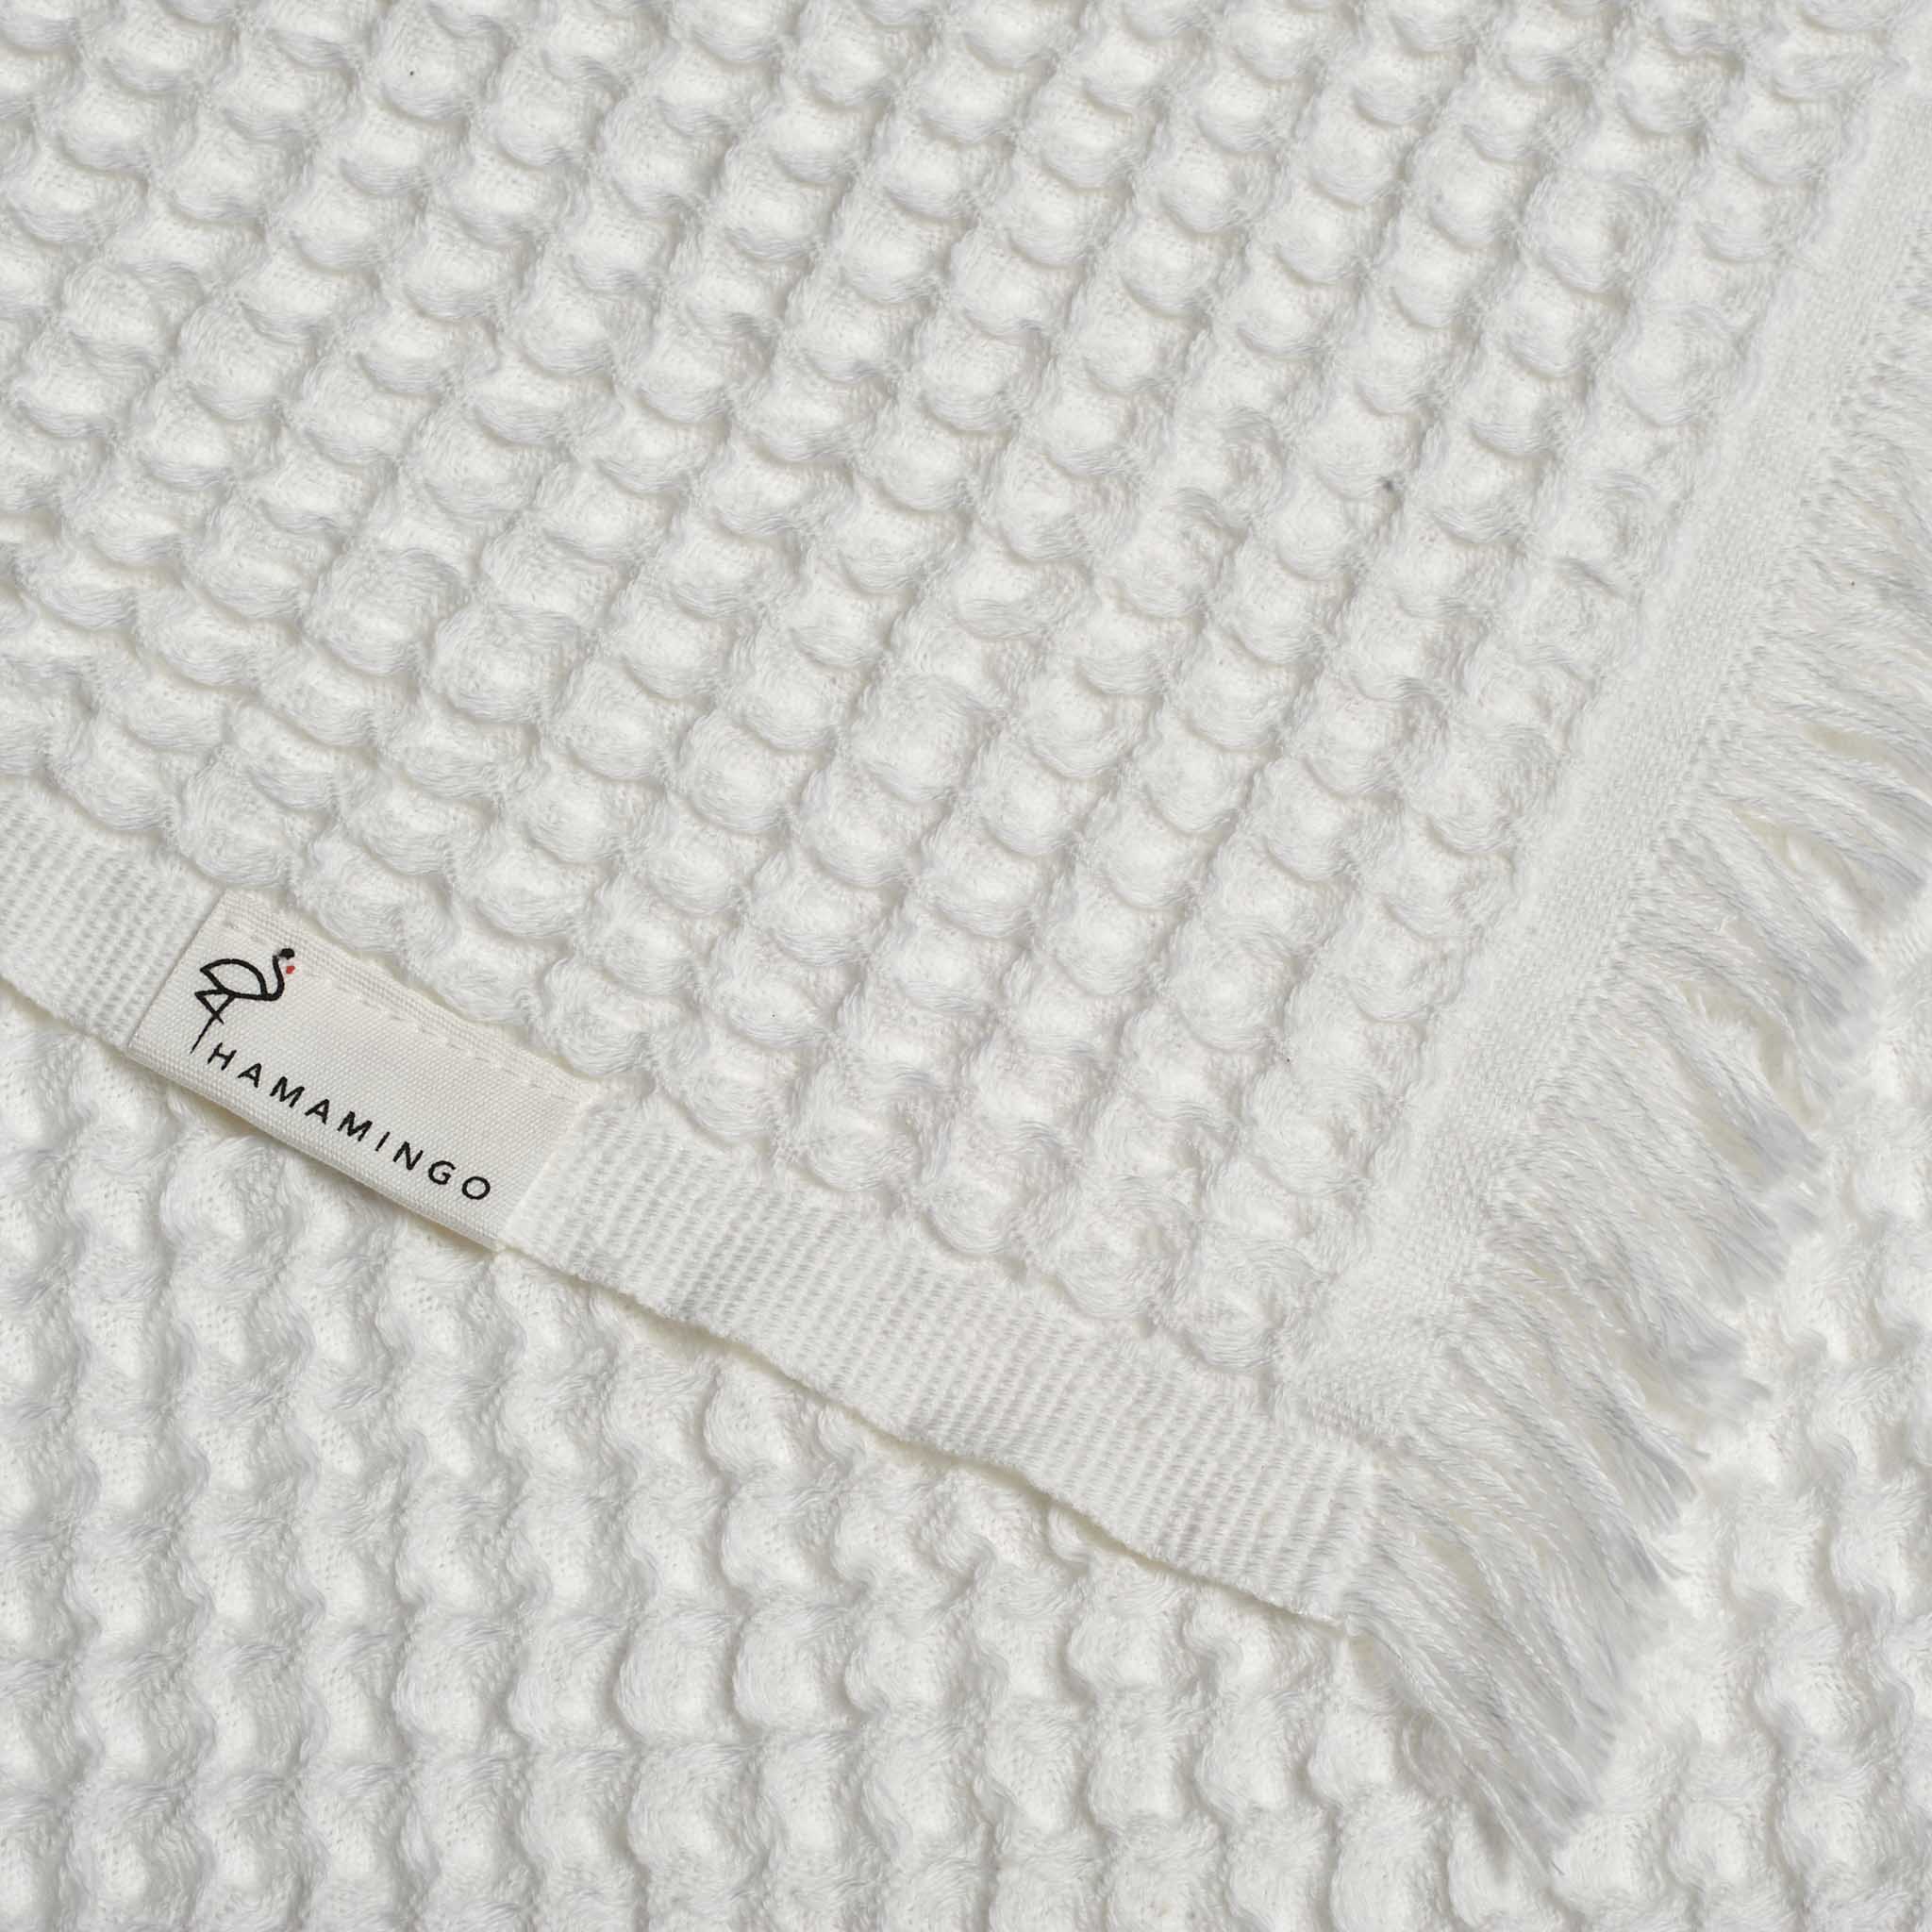 Bruges Towel Pure White